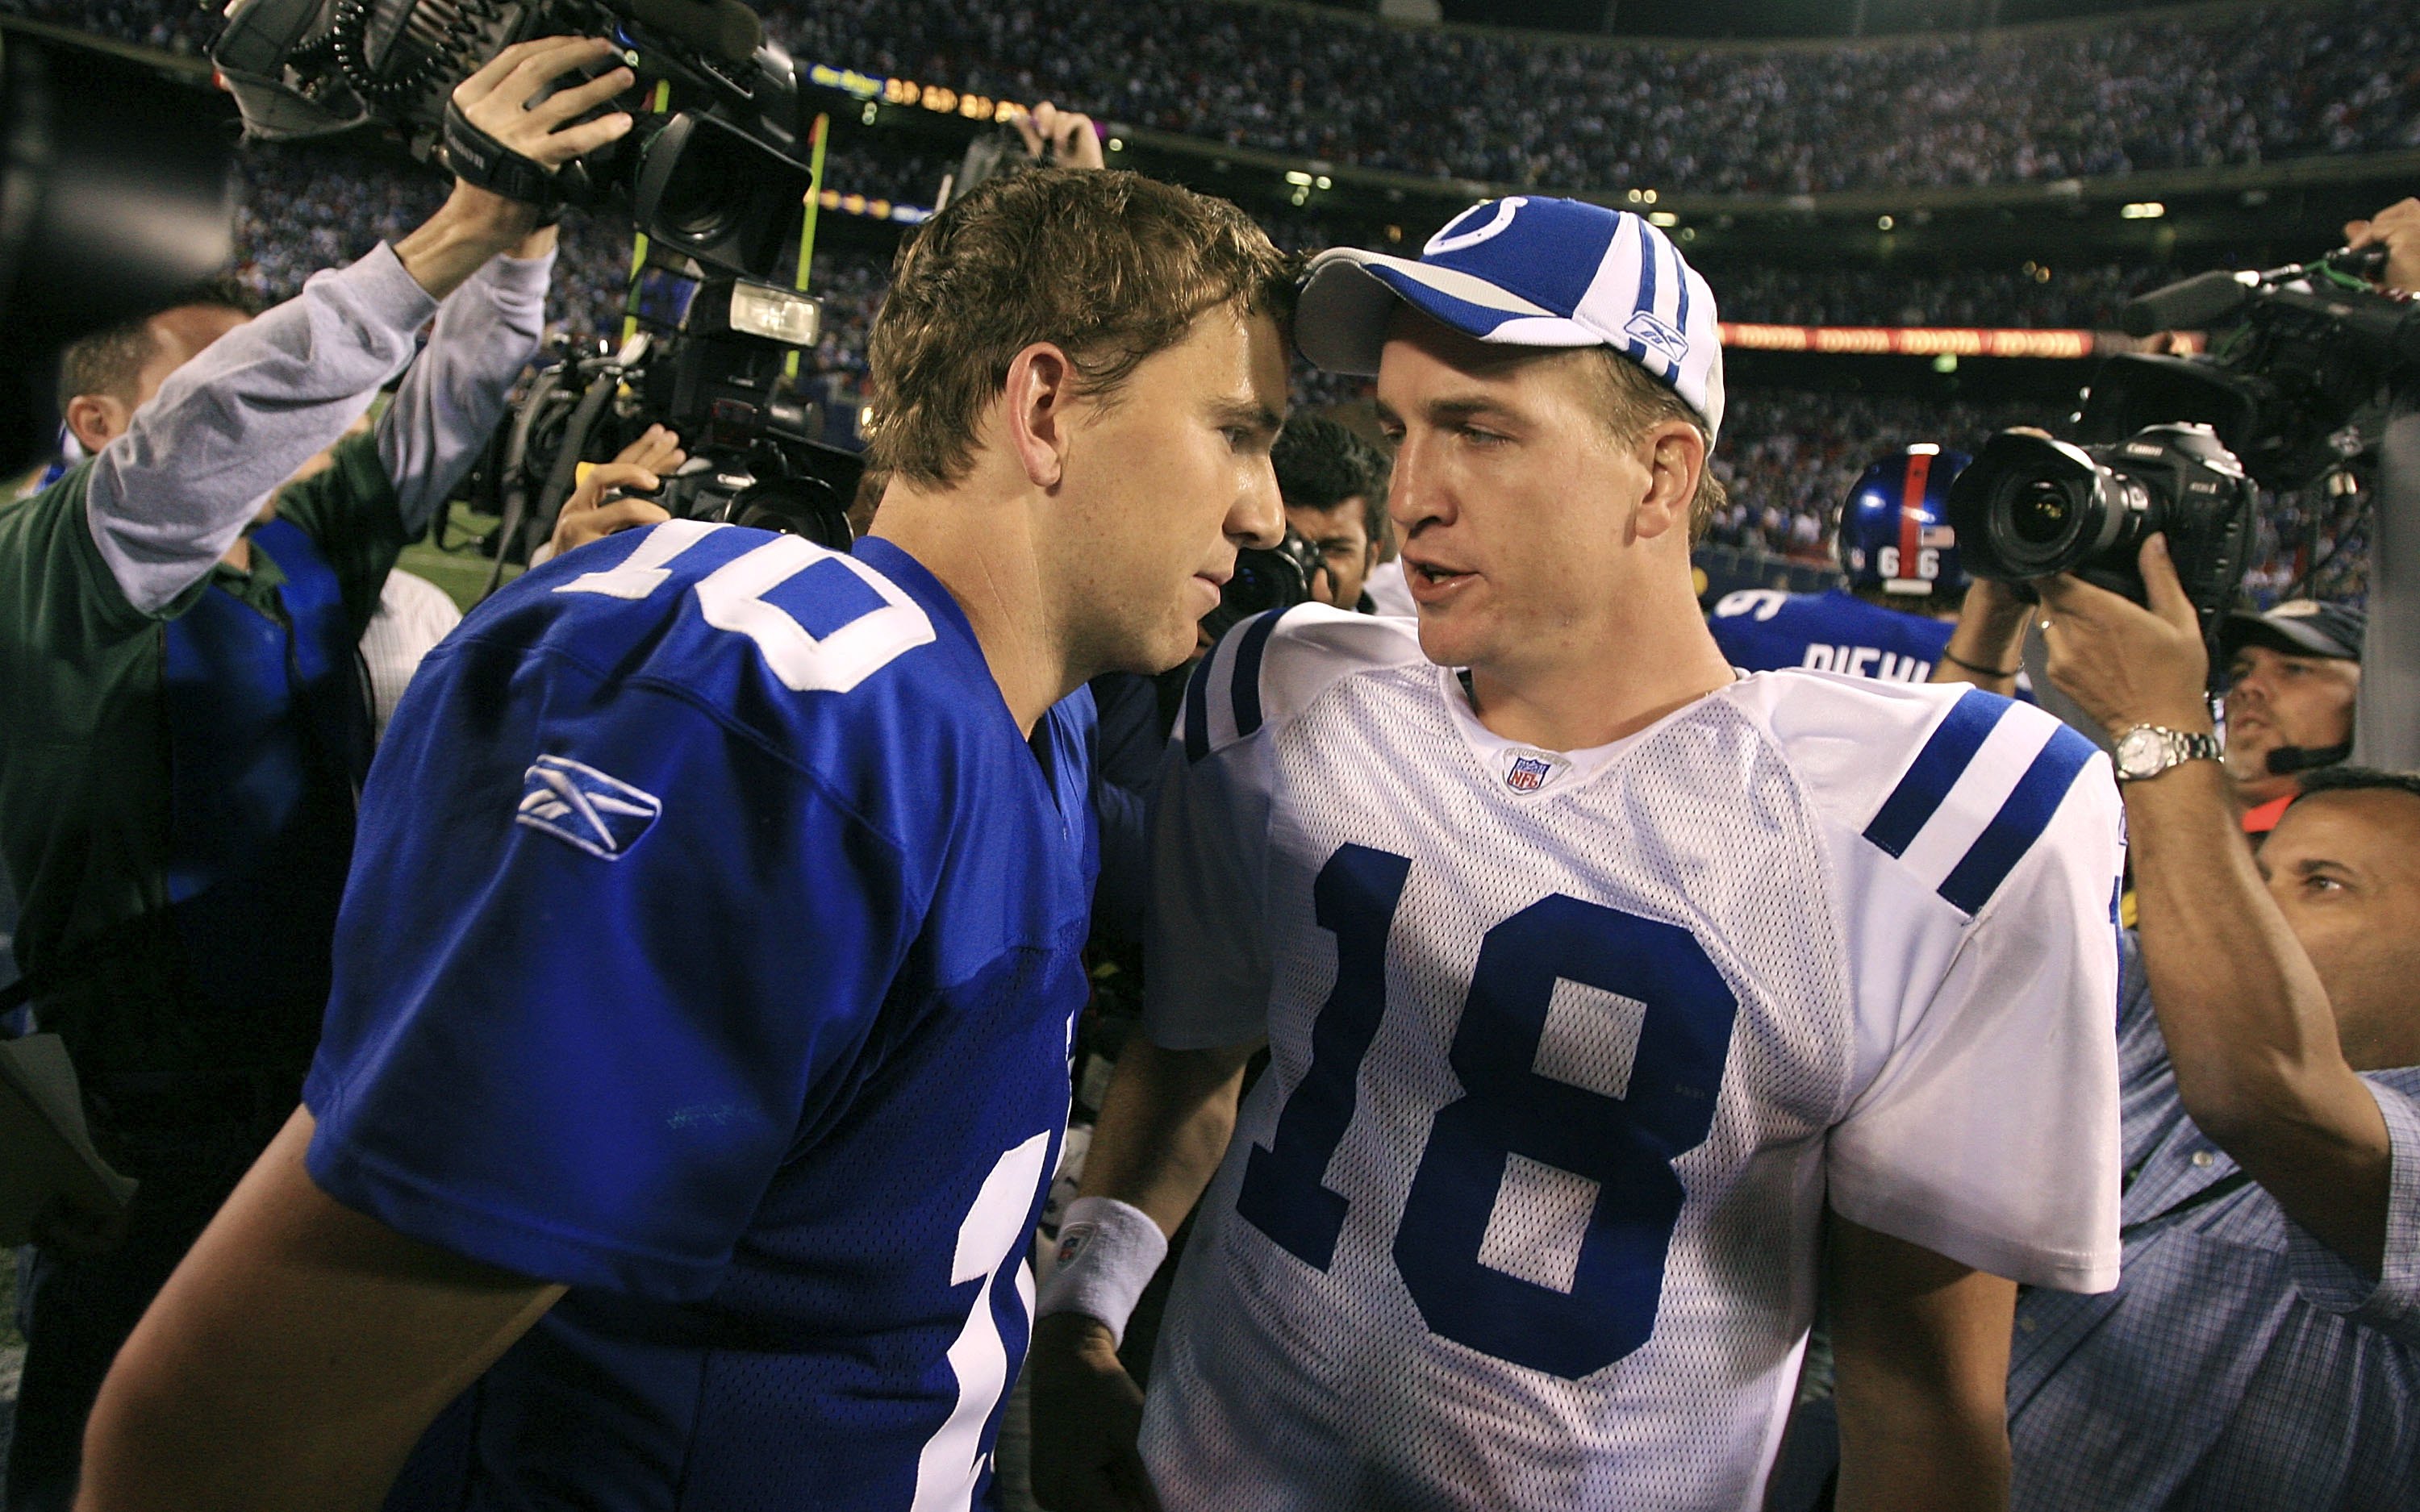 Eli and Peyton Manning talking after playing each other in an NFL game